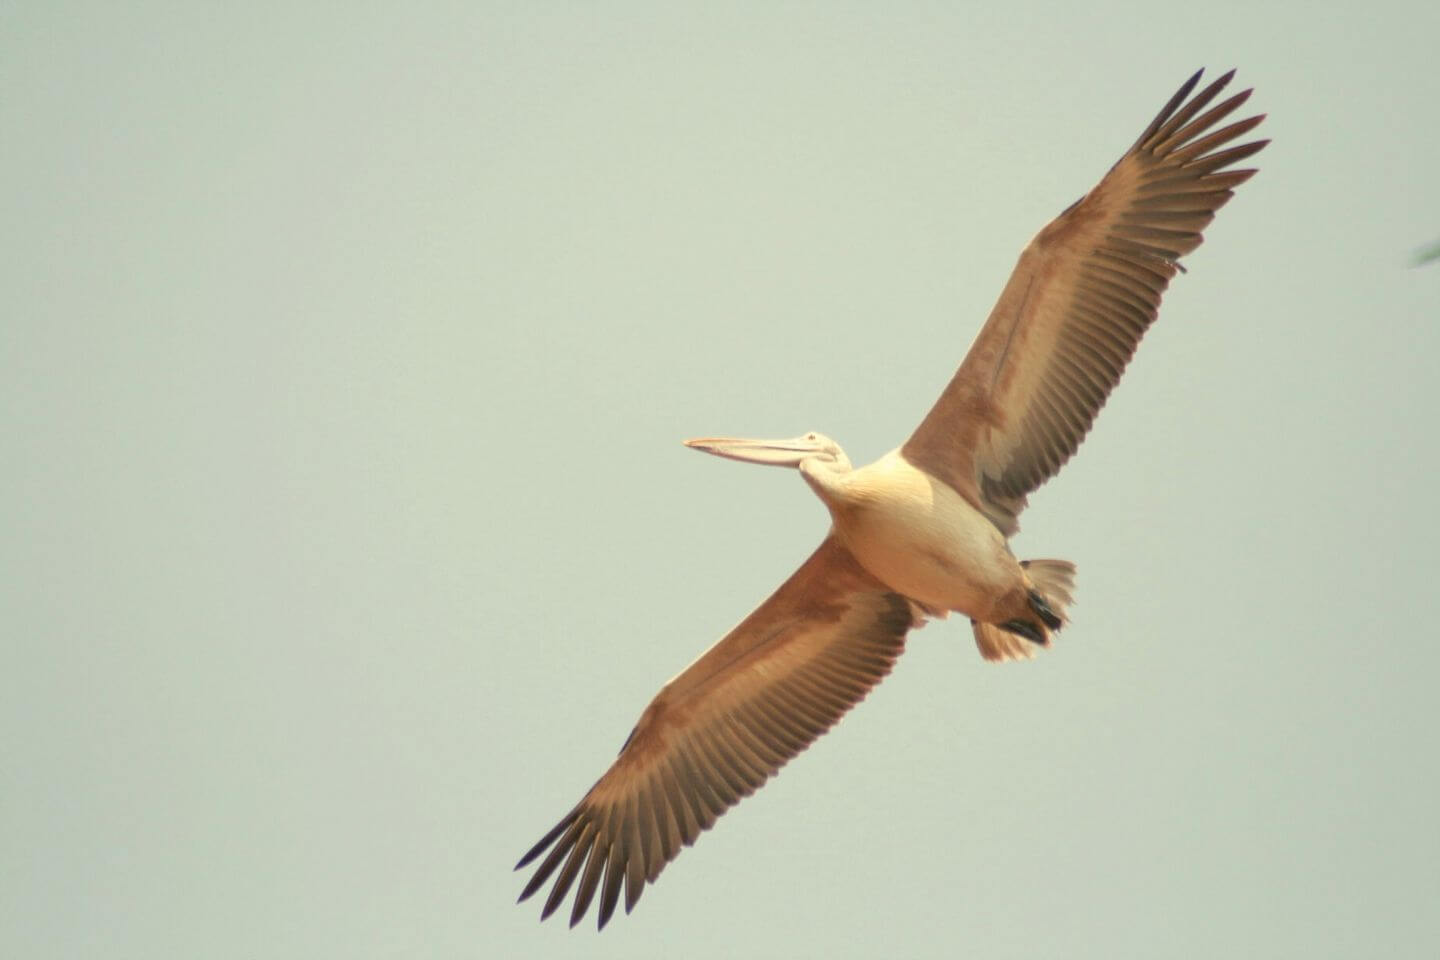 Kokkare Bellur Bird Sanctuary near Bangalore within 100 km to visit with Friends